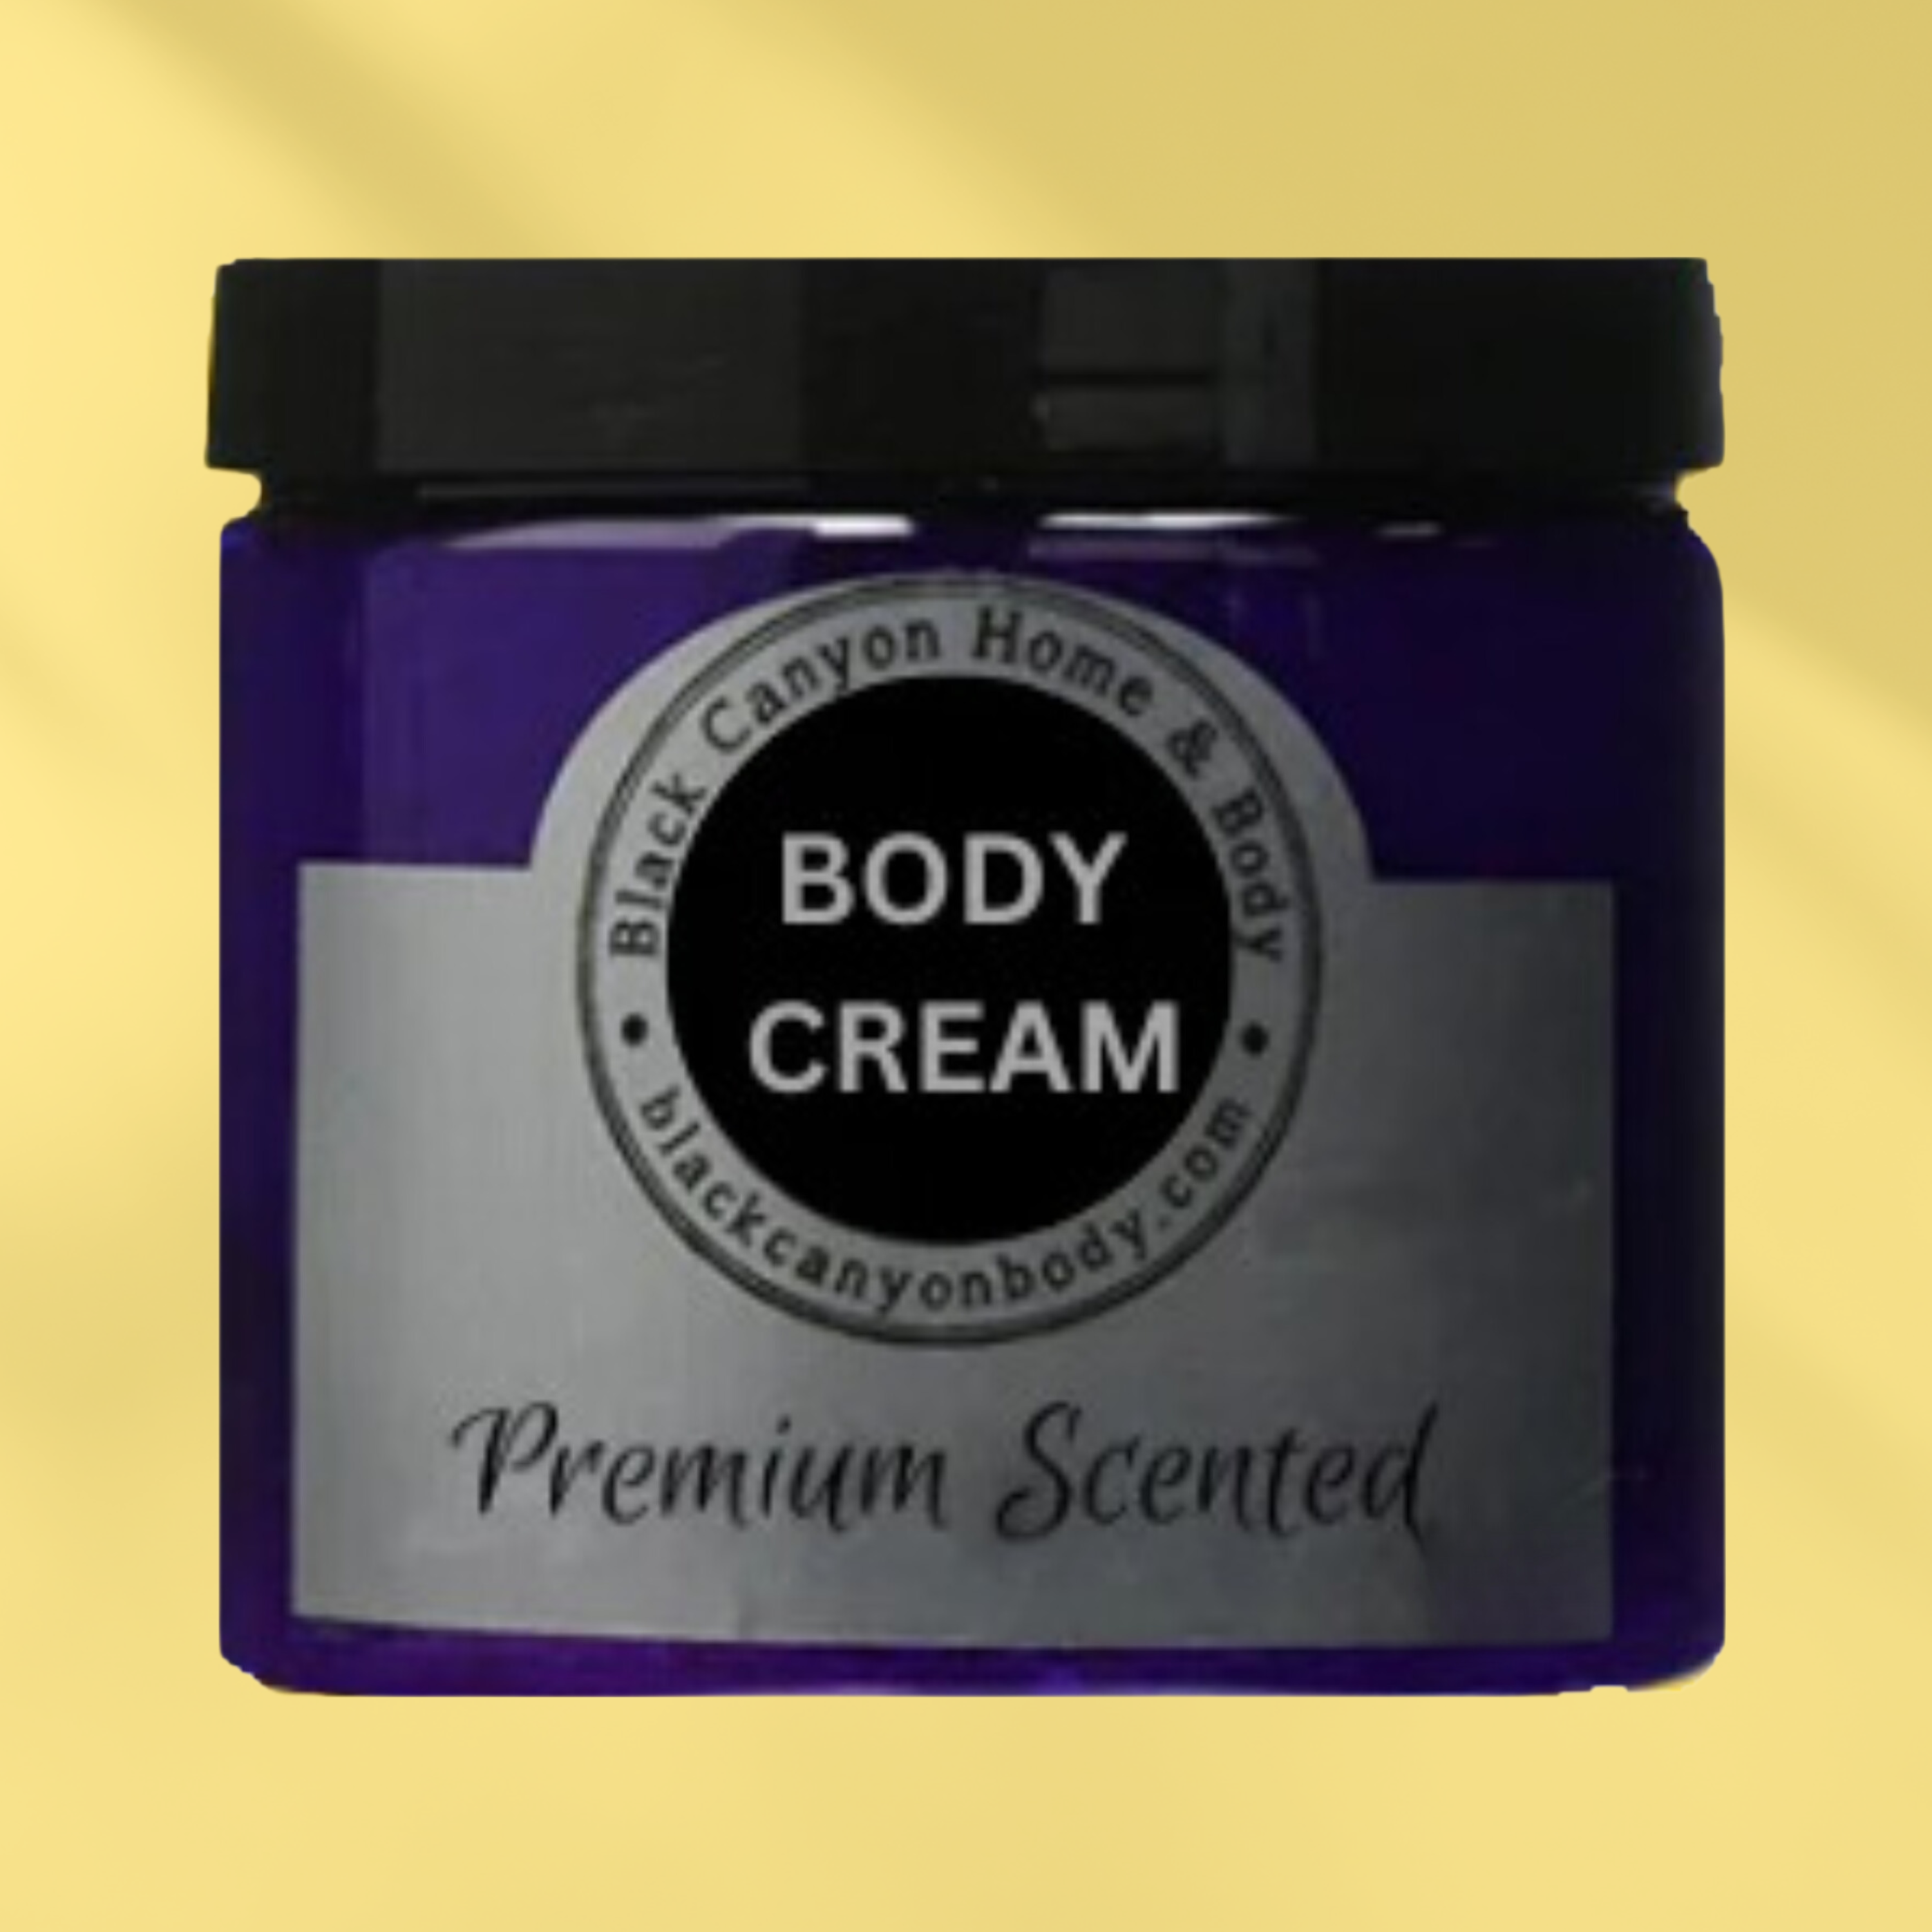 Black Canyon Berry Cereal Crunch Scented Luxury Body Cream with Aloe